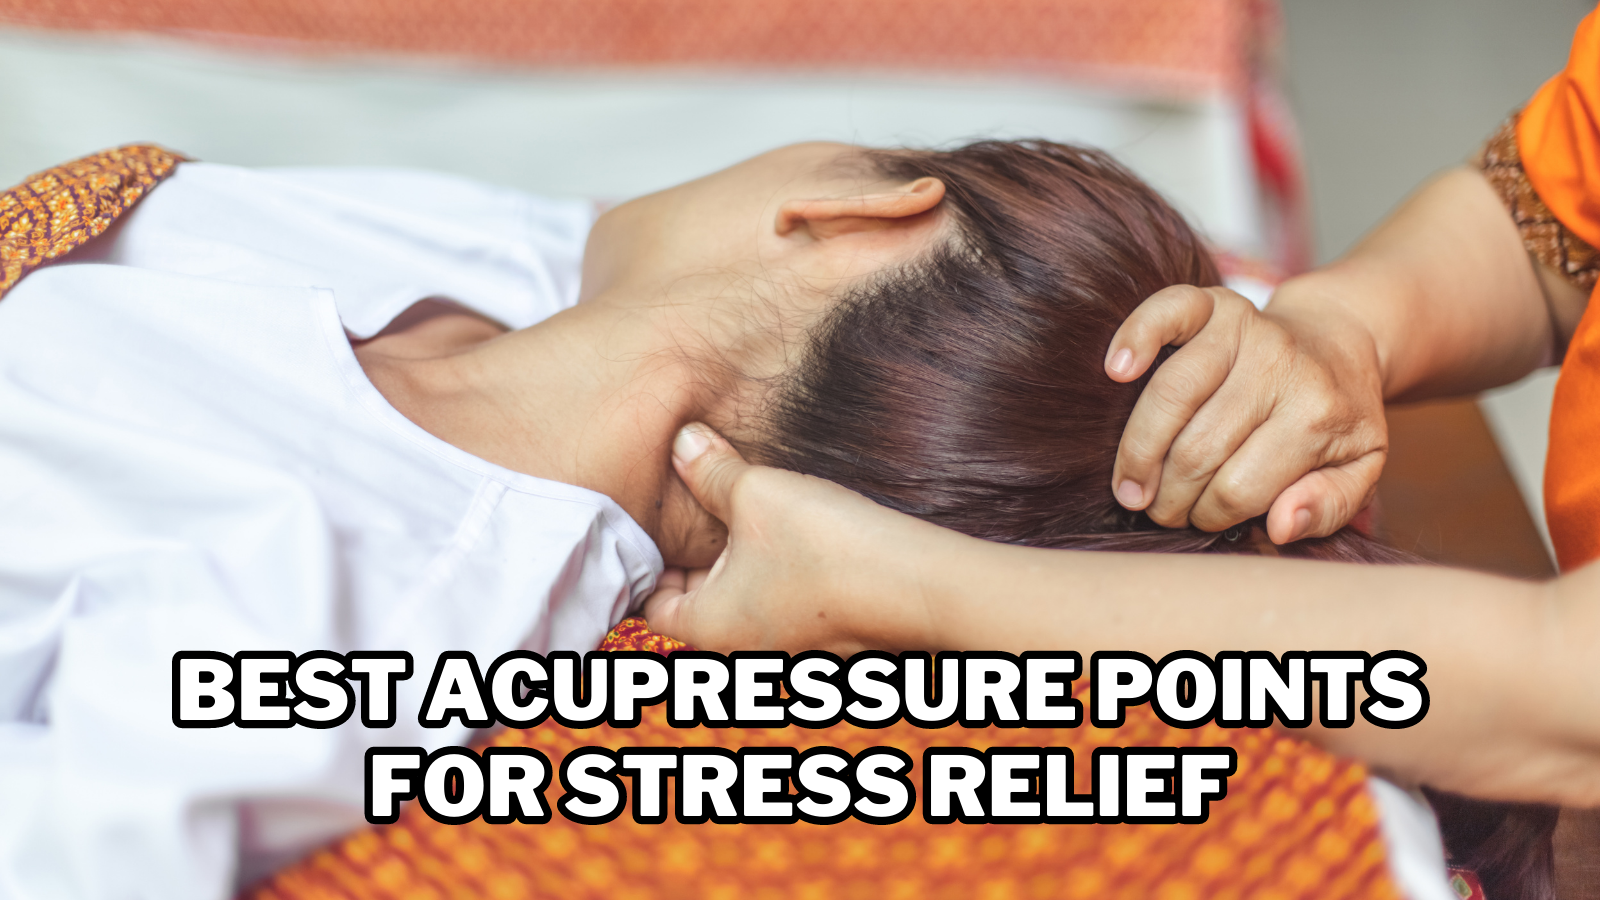 Best Acupressure Points For Stress Relief